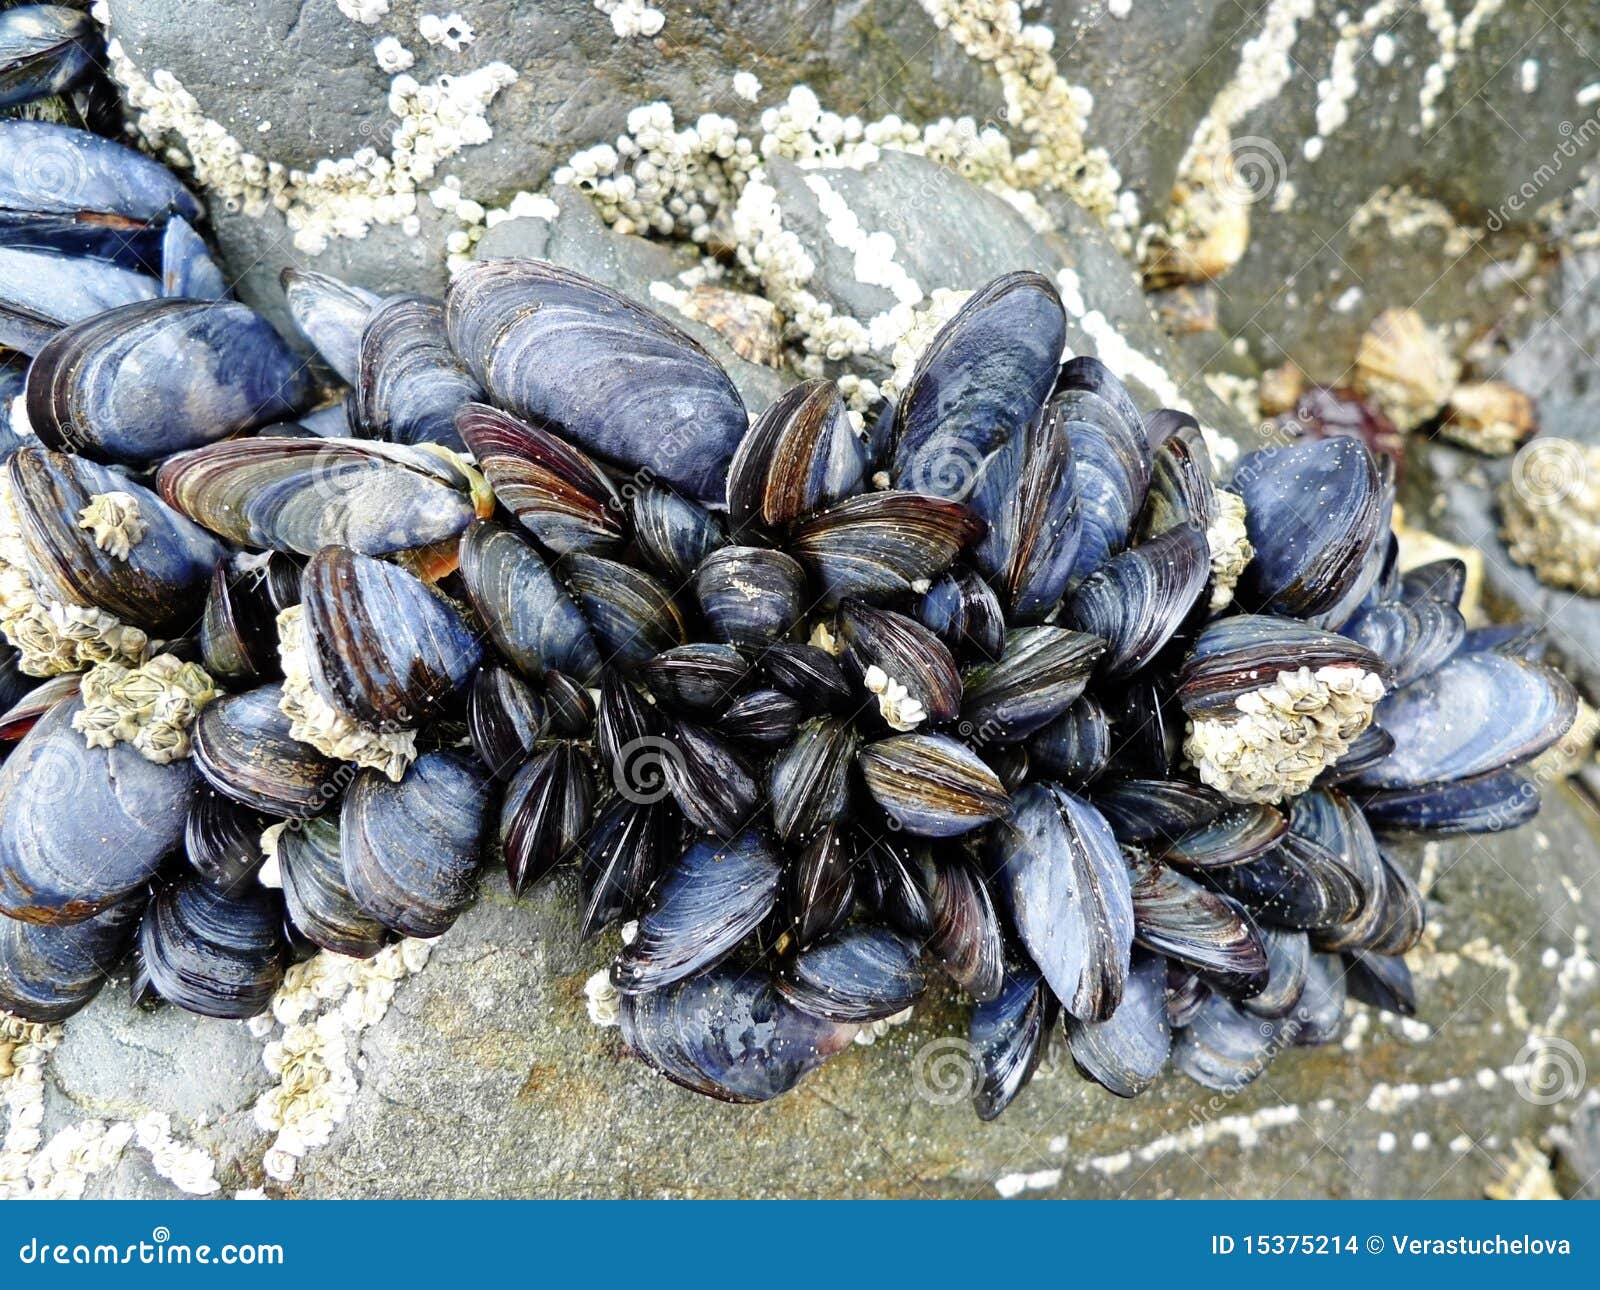 eatable mussels on a stones